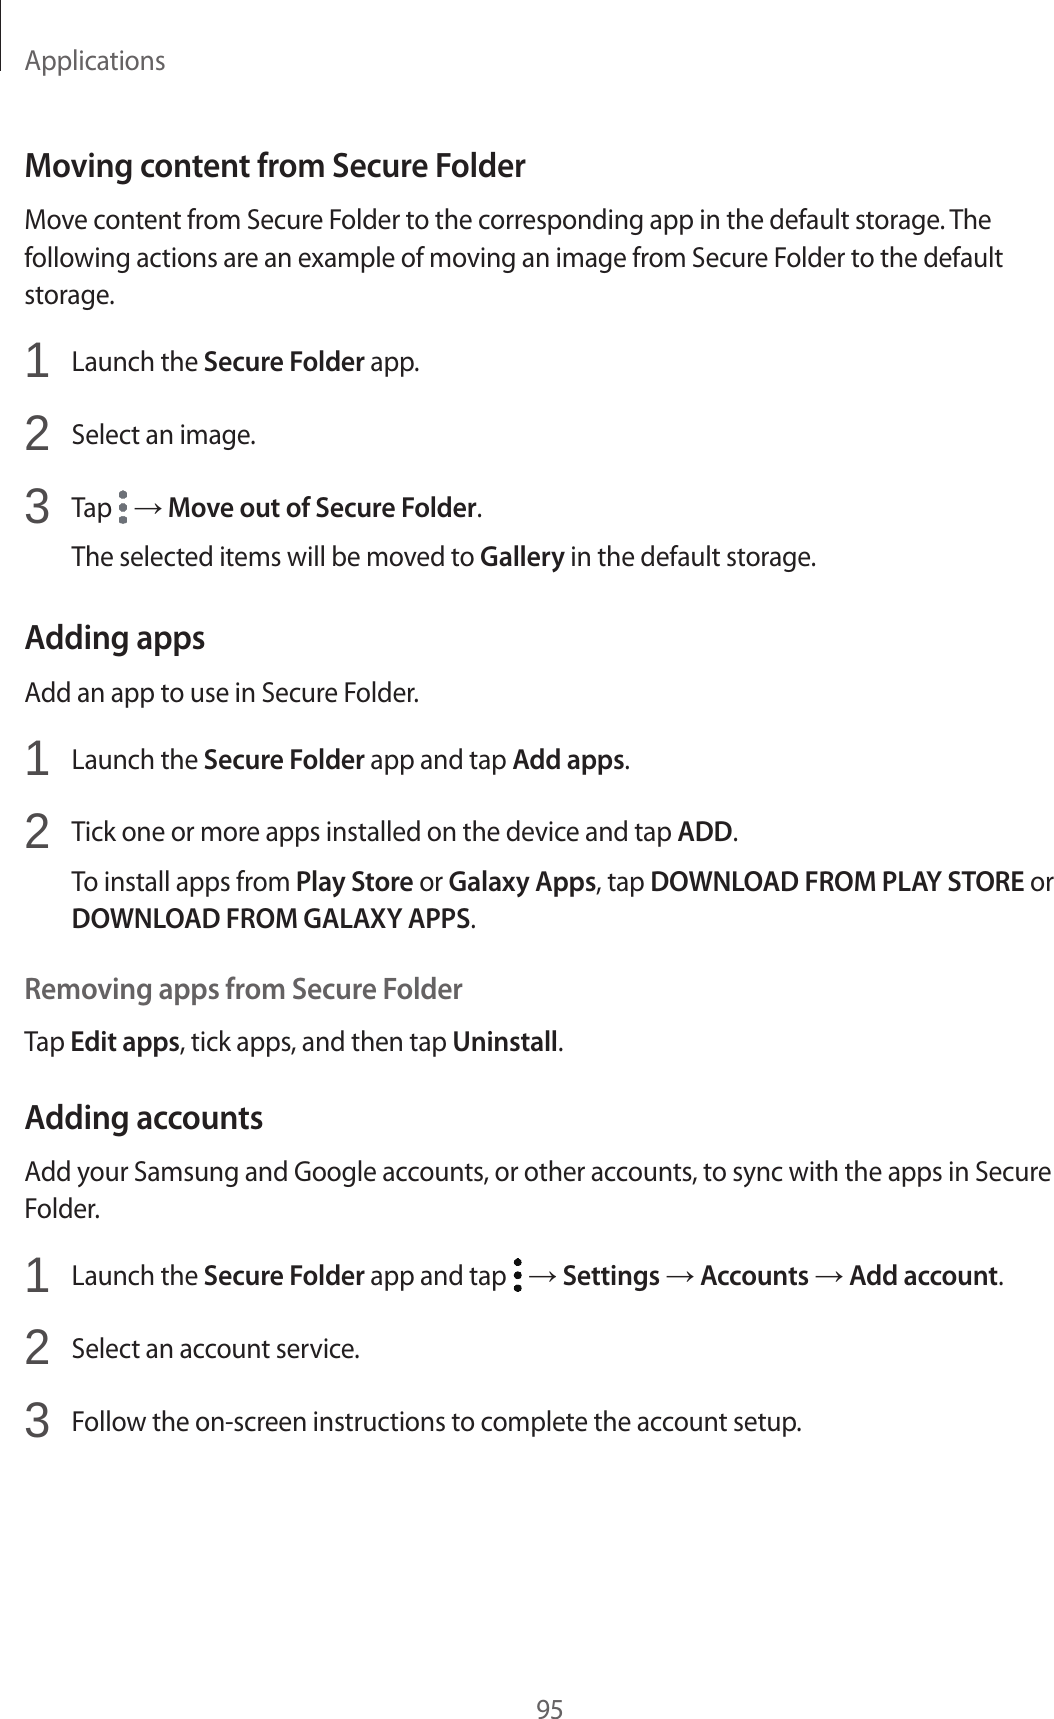 Applications95Moving content from Secure FolderMove content from Secure Folder to the corresponding app in the default storage. The following actions are an example of moving an image from Secure Folder to the default storage.1  Launch the Secure Folder app.2  Select an image.3  Tap   → Move out of Secure Folder.The selected items will be moved to Gallery in the default storage.Adding appsAdd an app to use in Secure Folder.1  Launch the Secure Folder app and tap Add apps.2  Tick one or more apps installed on the device and tap ADD.To install apps from Play Store or Galaxy Apps, tap DOWNLOAD FROM PLAY STORE or DOWNLOAD FROM GALAXY APPS.Removing apps from Secure FolderTap Edit apps, tick apps, and then tap Uninstall.Adding accountsAdd your Samsung and Google accounts, or other accounts, to sync with the apps in Secure Folder.1  Launch the Secure Folder app and tap   → Settings → Accounts → Add account.2  Select an account service.3  Follow the on-screen instructions to complete the account setup.